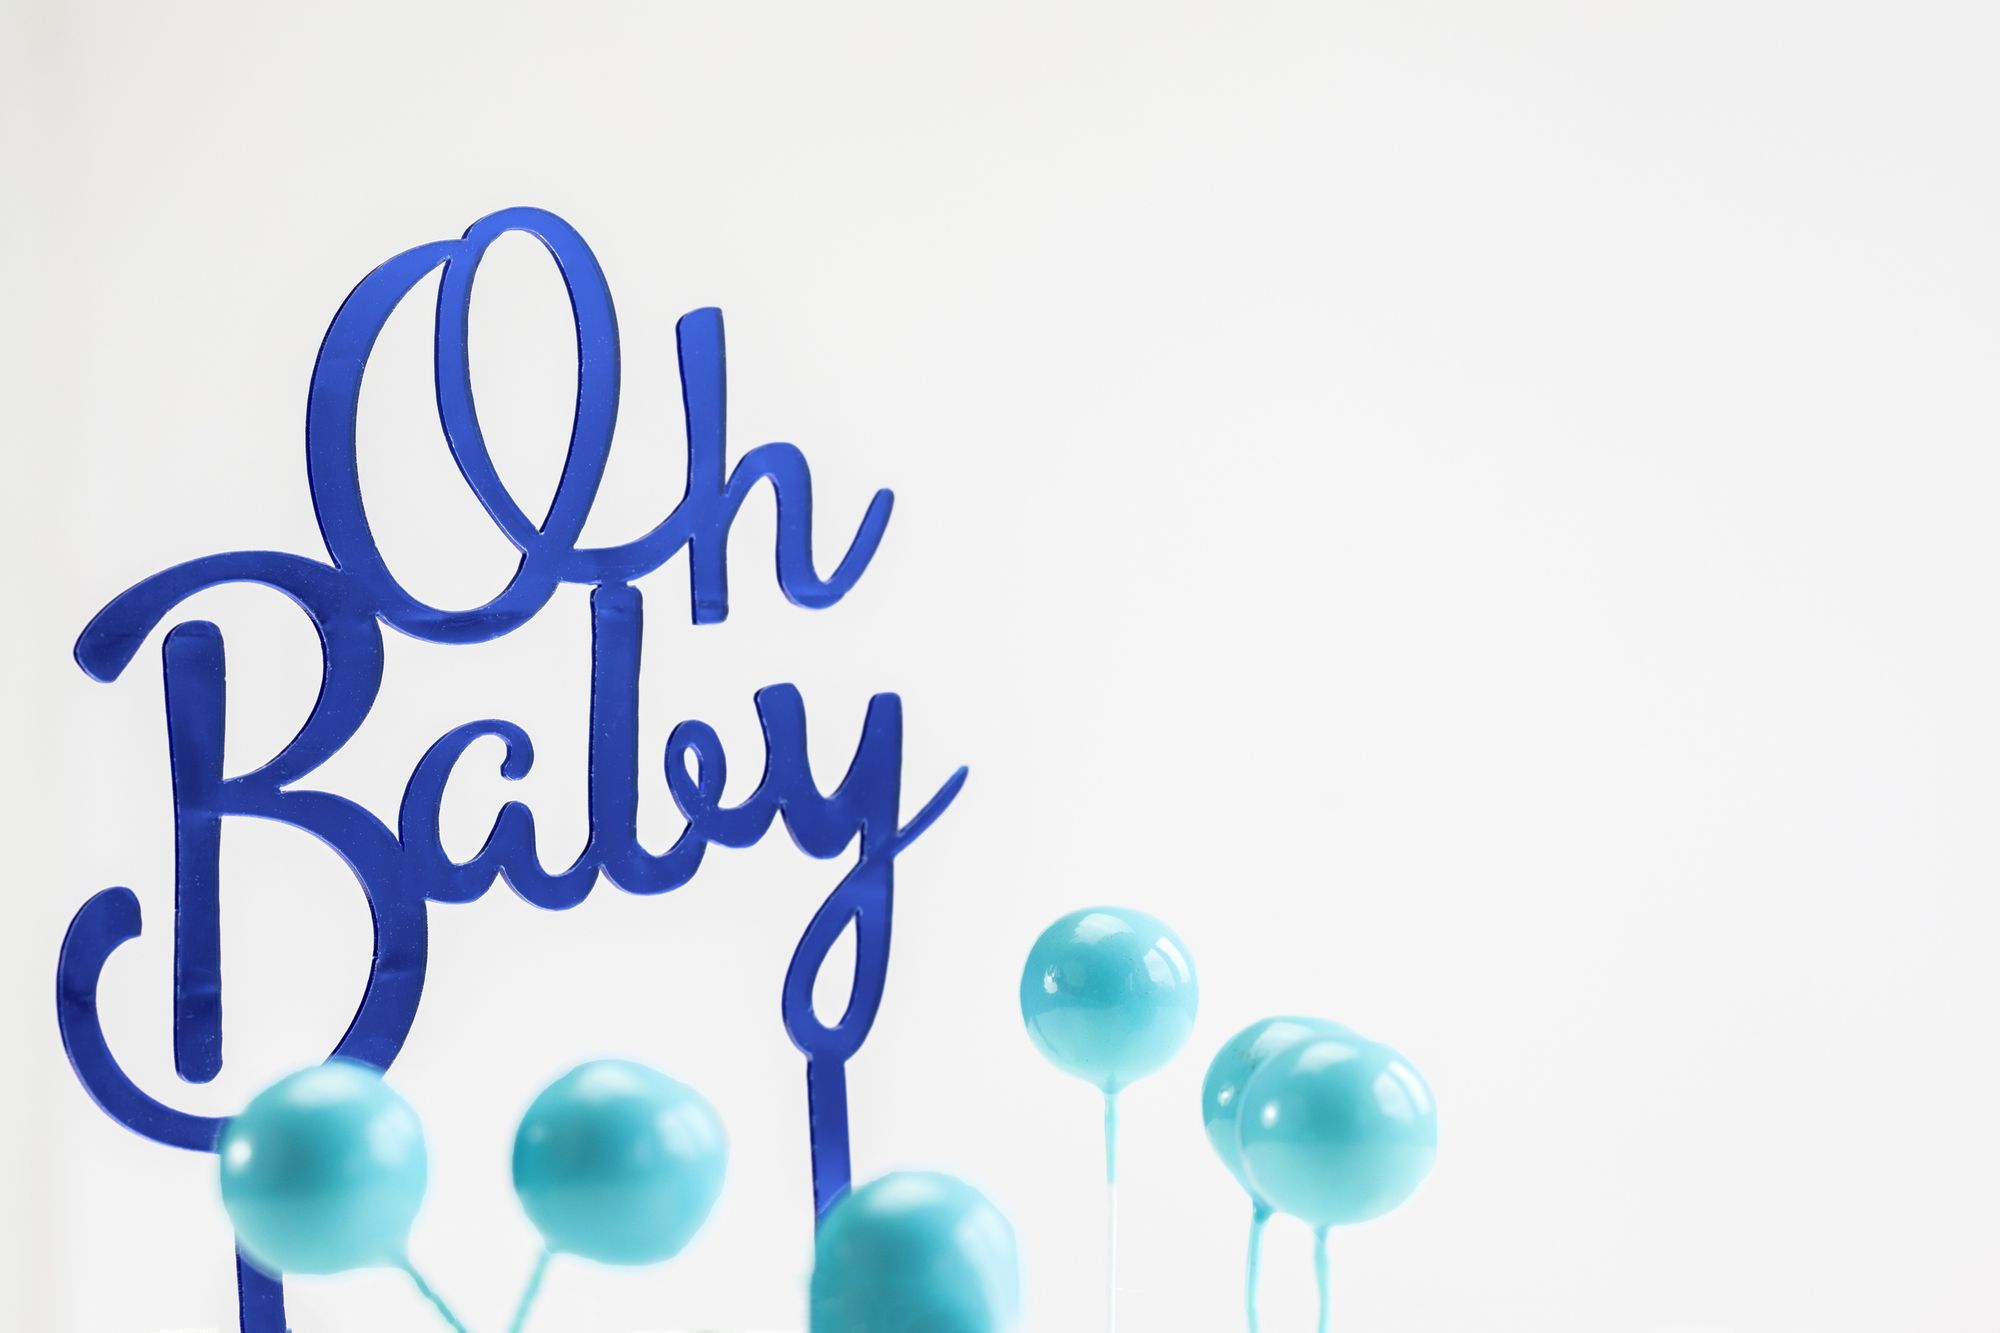 Darling Oh Baby Boy Baby Shower – More Ideas Added!